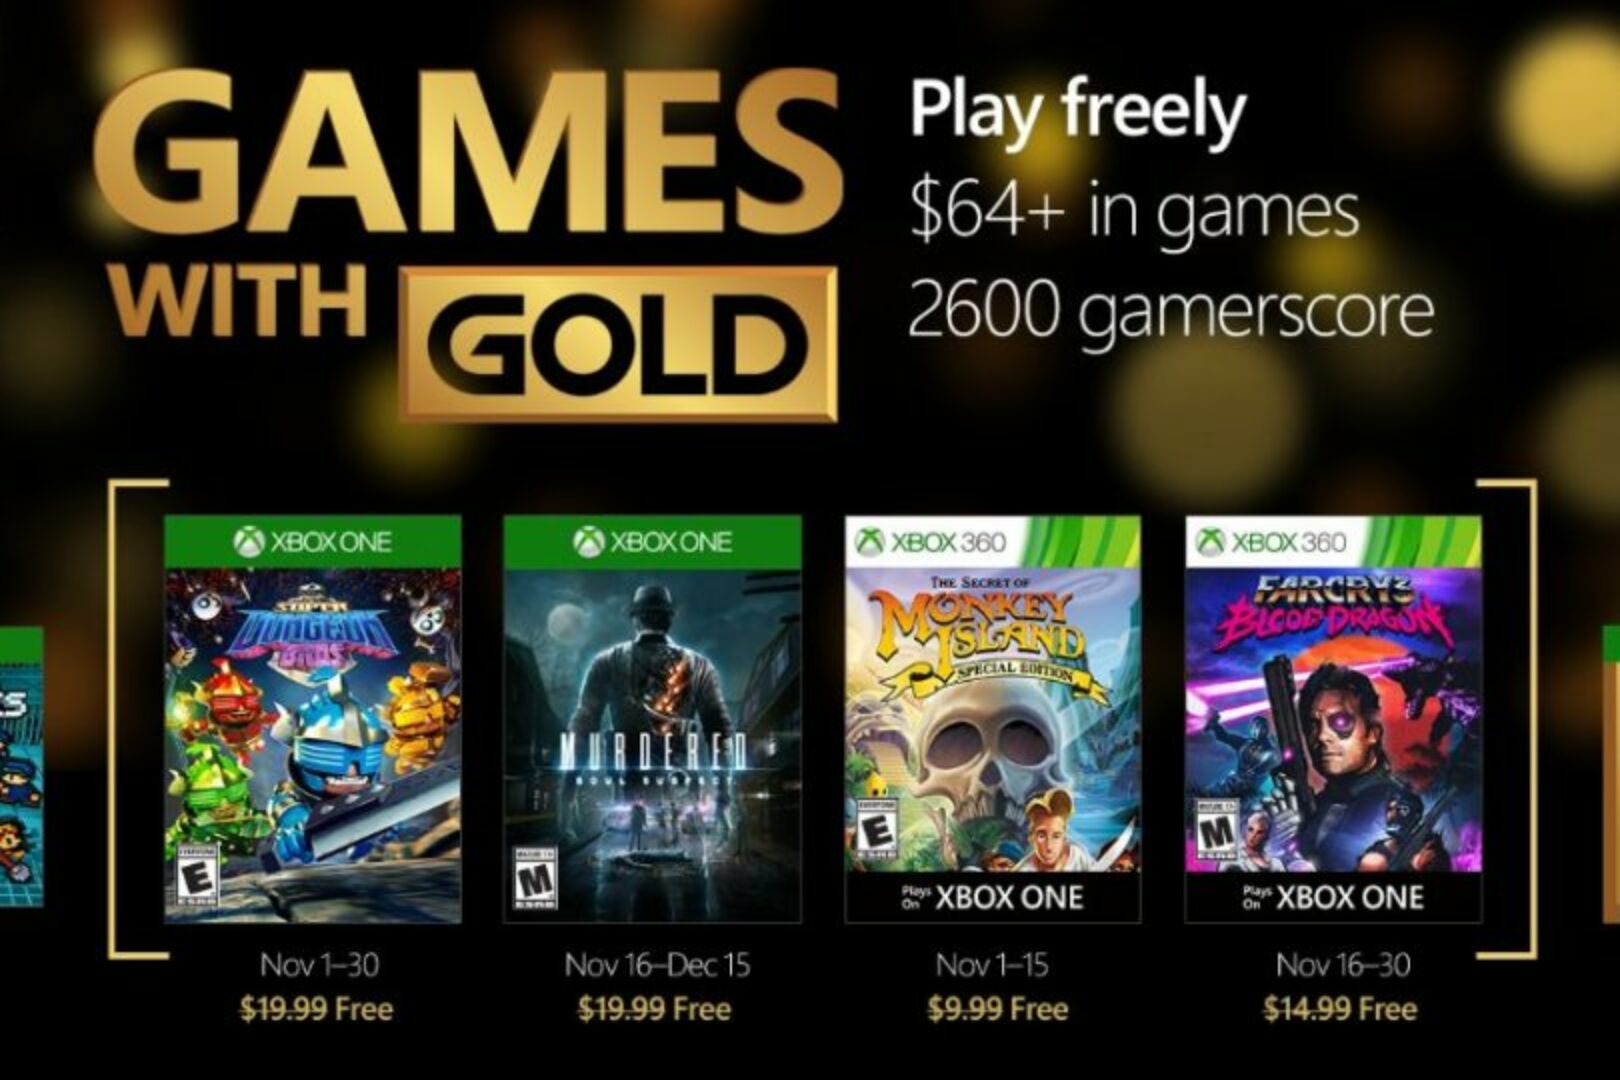 November’s Games with Gold Announced